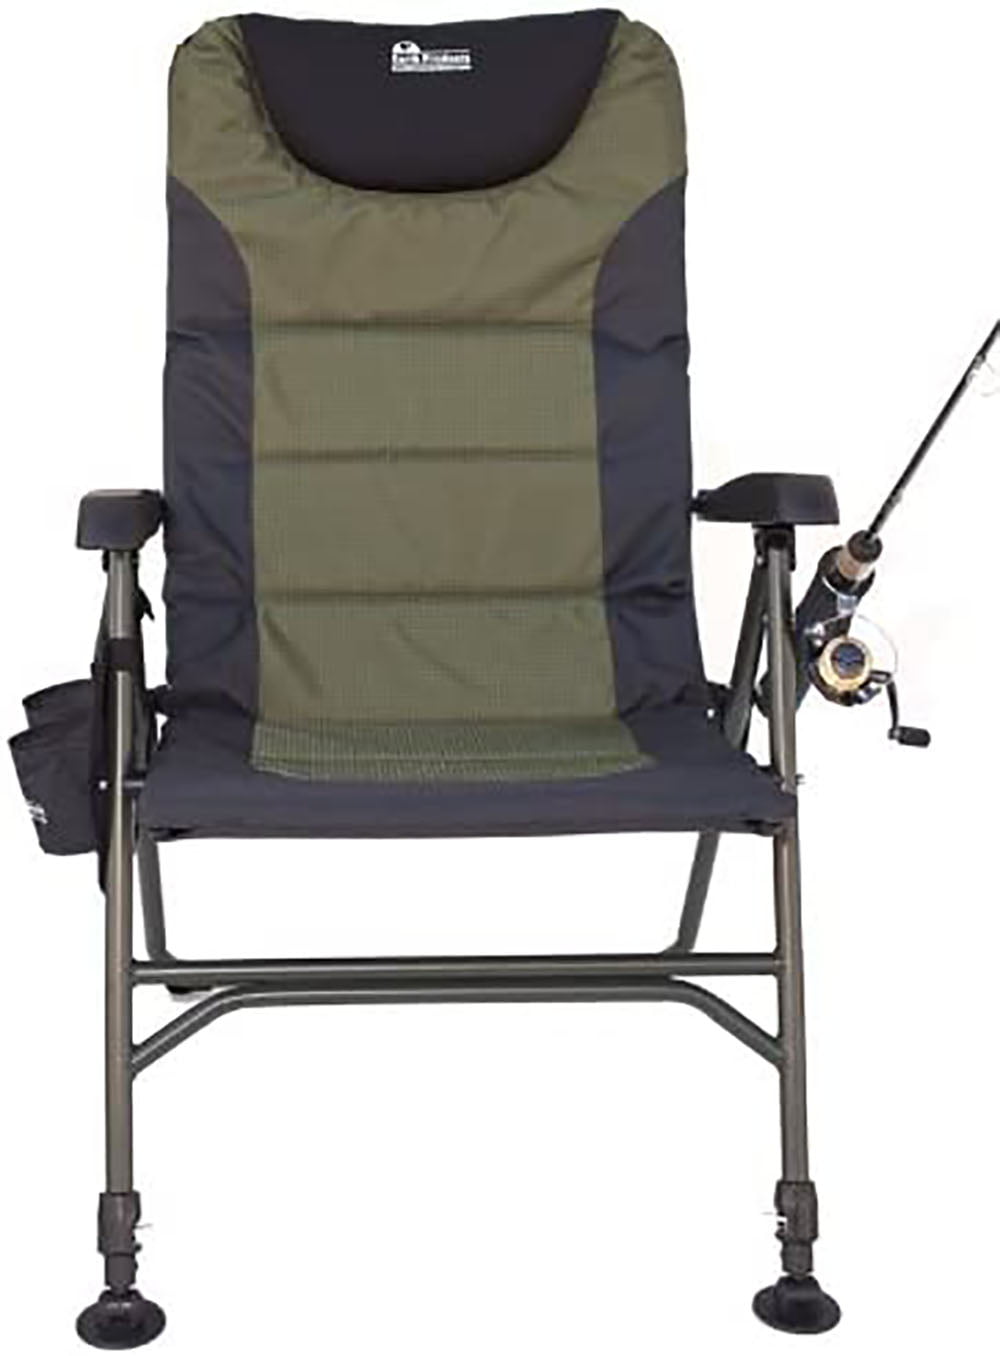 4-Position Adjustable Outdoor Fishing Chair w/Adjustable Front Legs